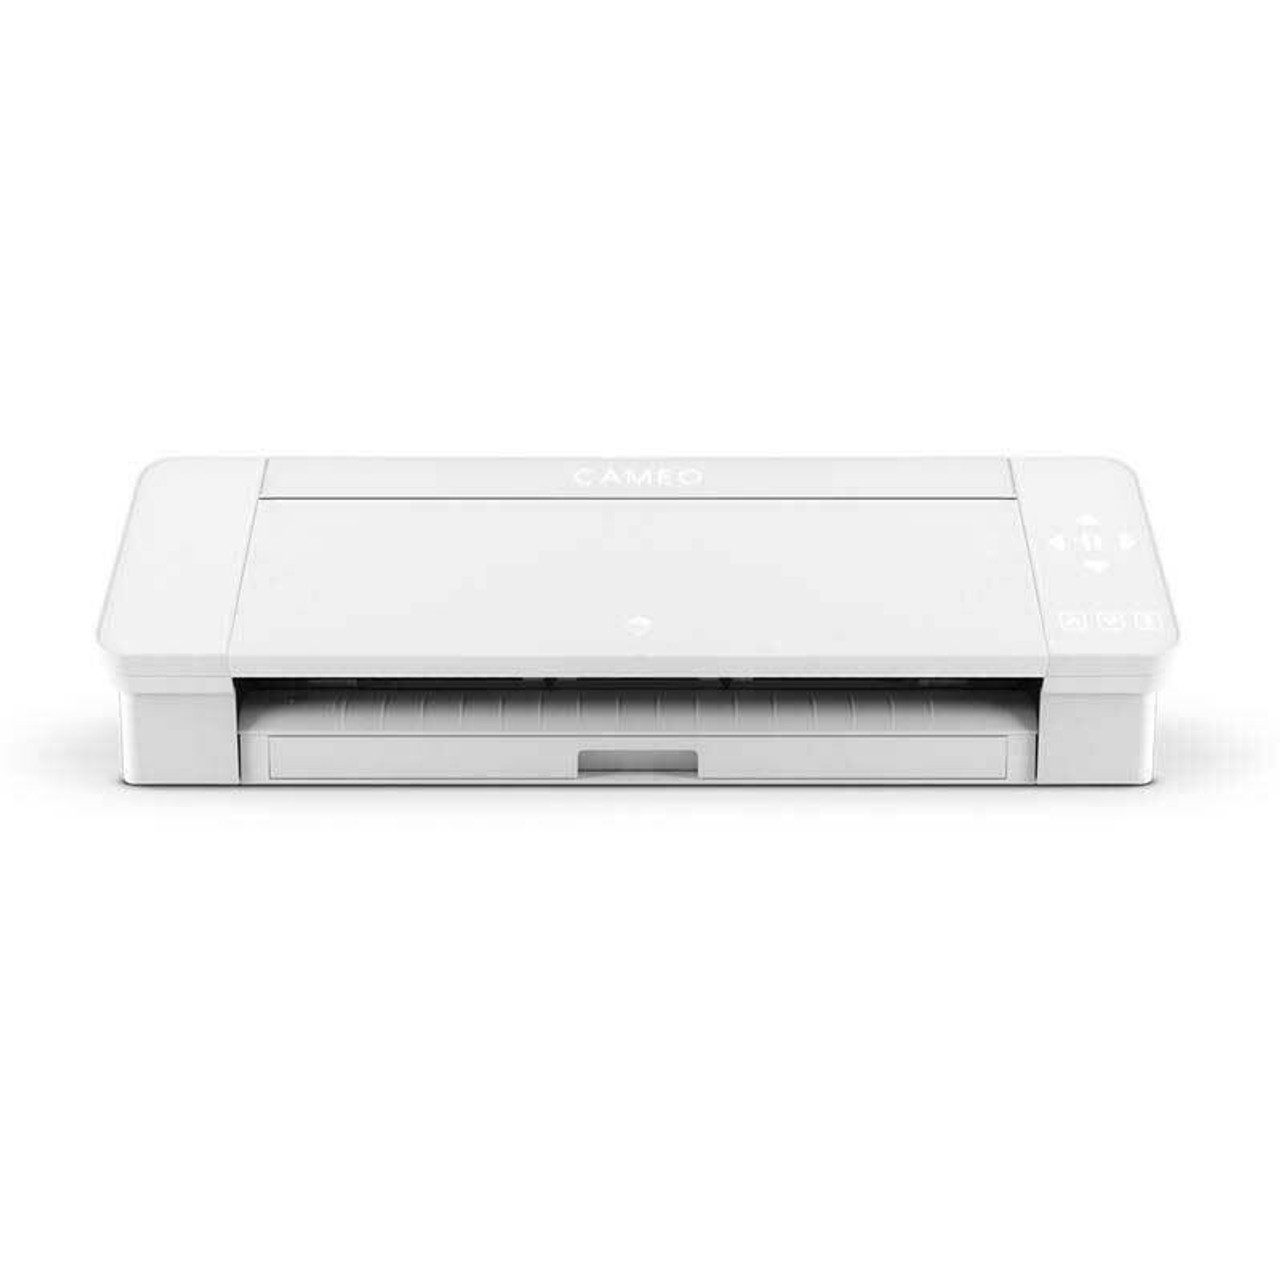 Silhouette White Cameo 5 - 12 Vinyl Cutter with Roll Feeder